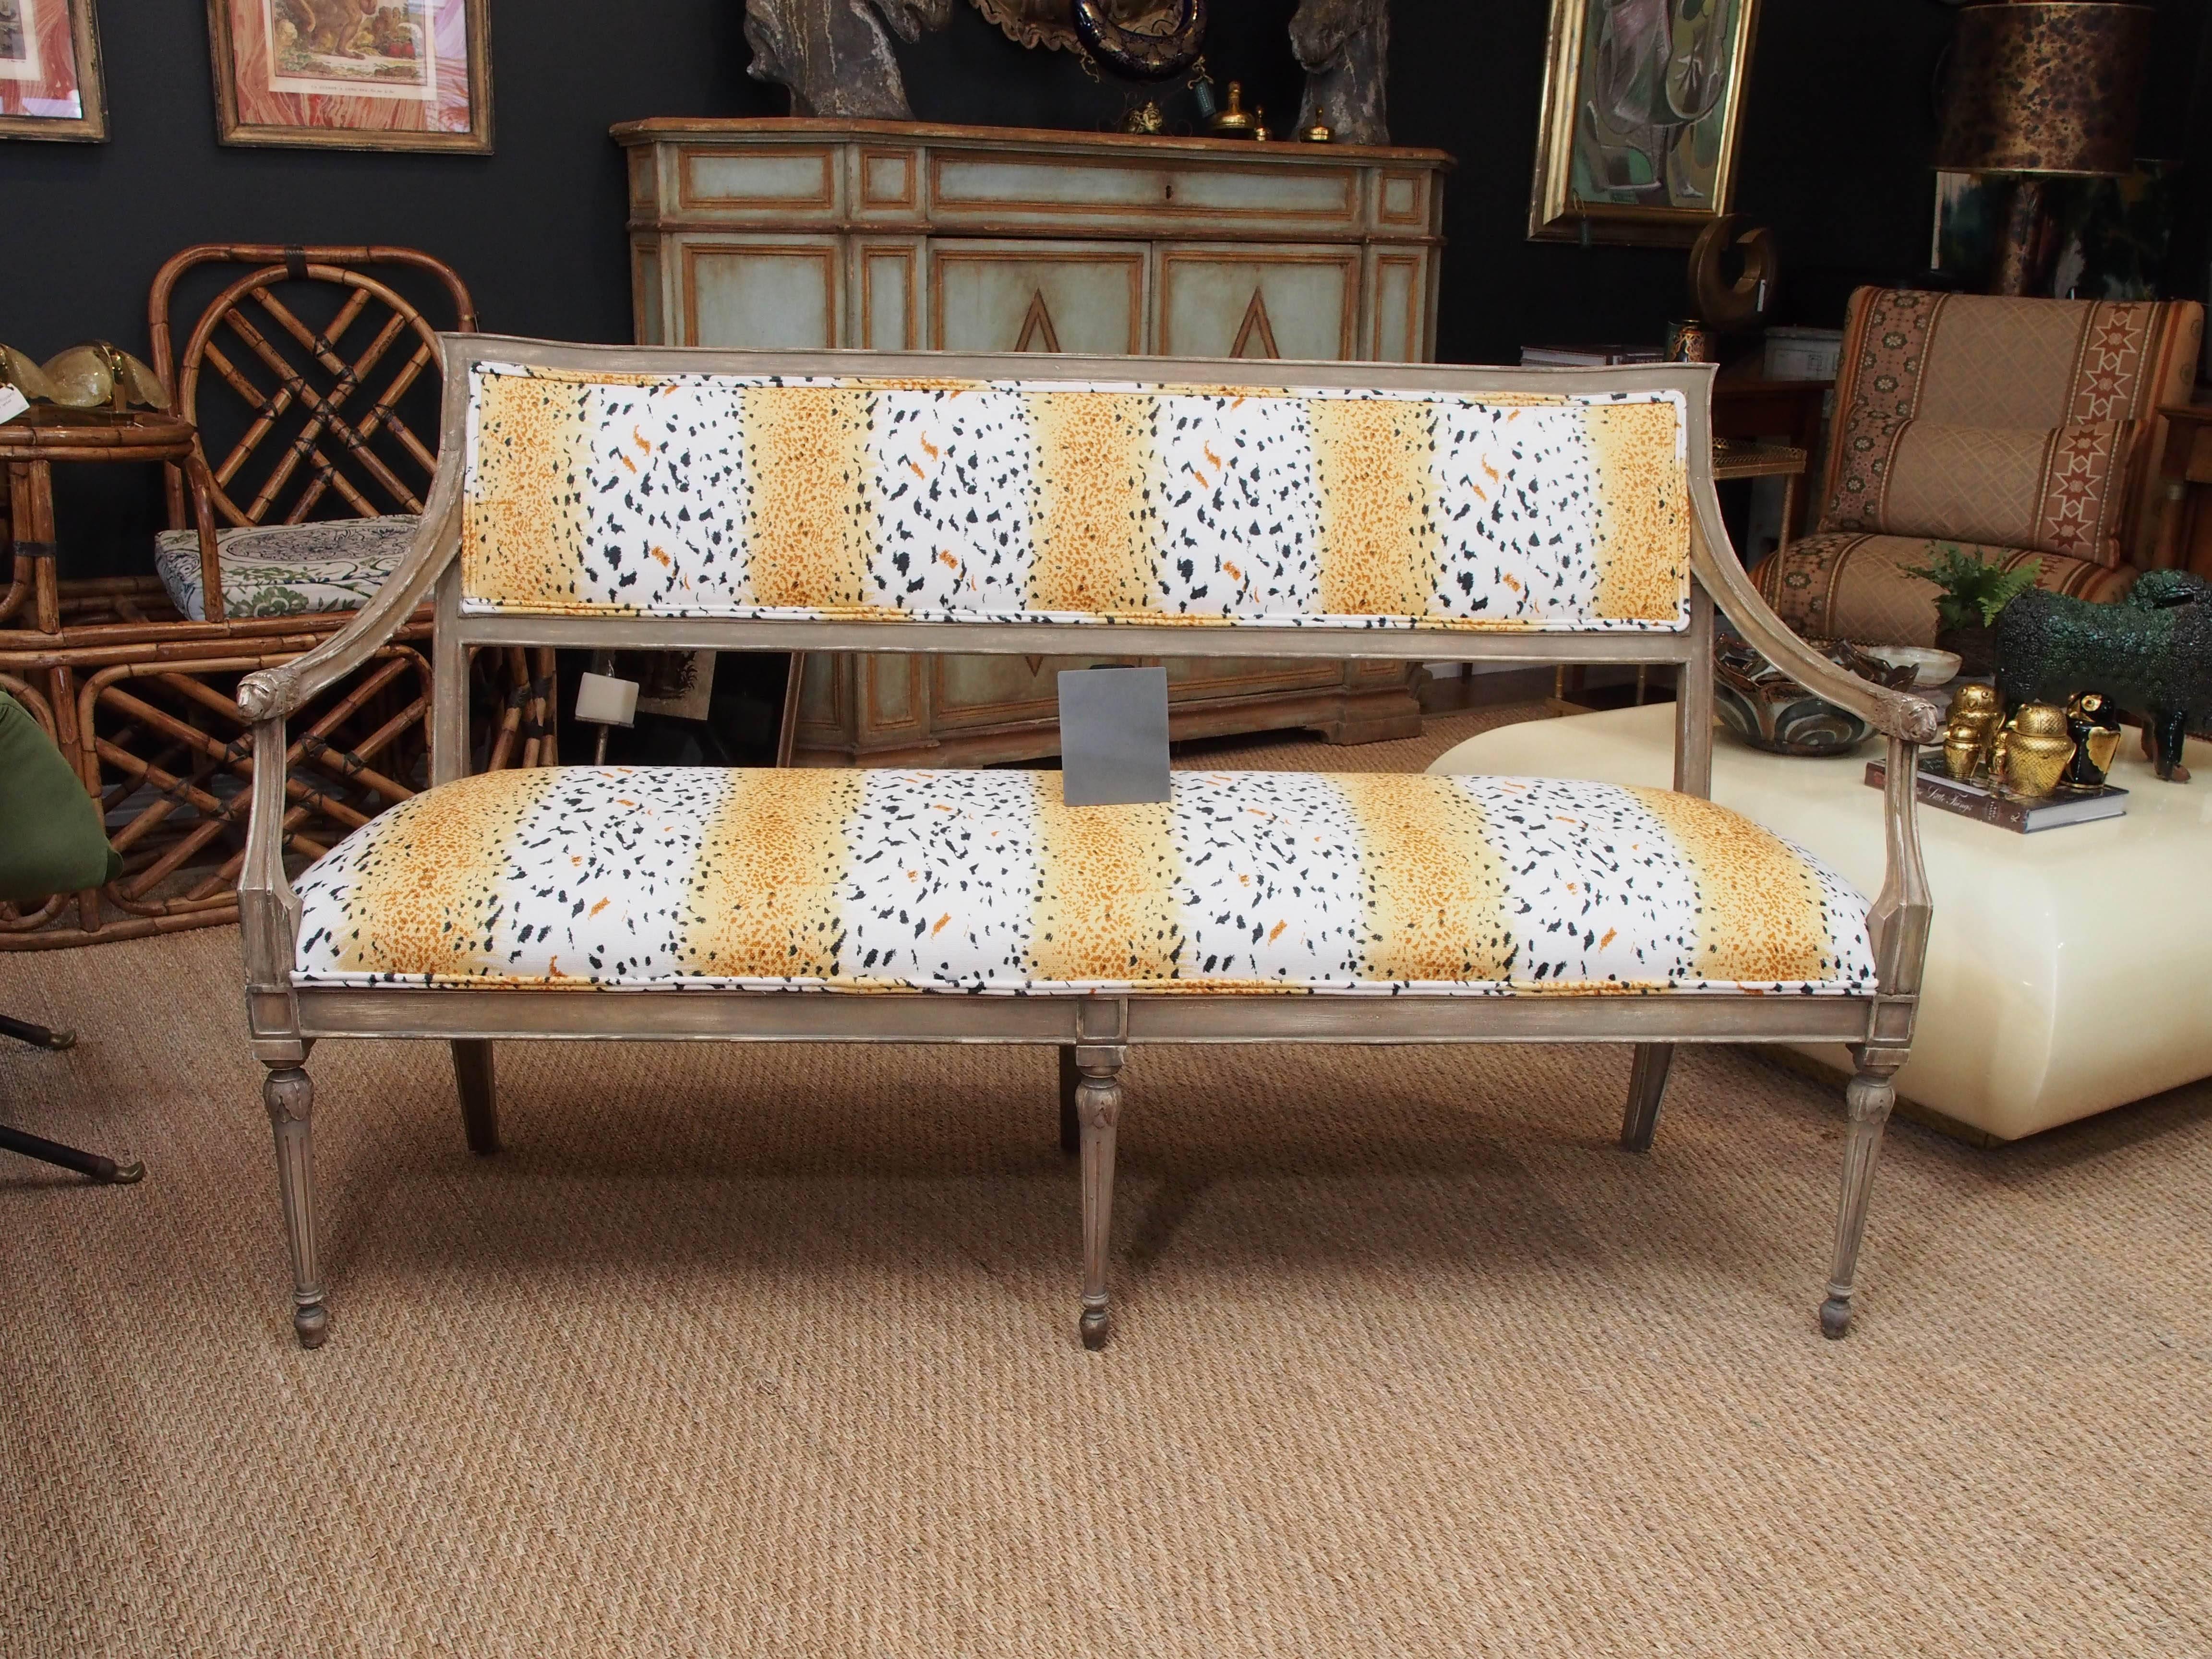 This French Provincial settee is hand-carved with lion's head handles. Angular framed back with sweeping arm and rest supports, carved details and fluted legs. Covered in animal print linen.